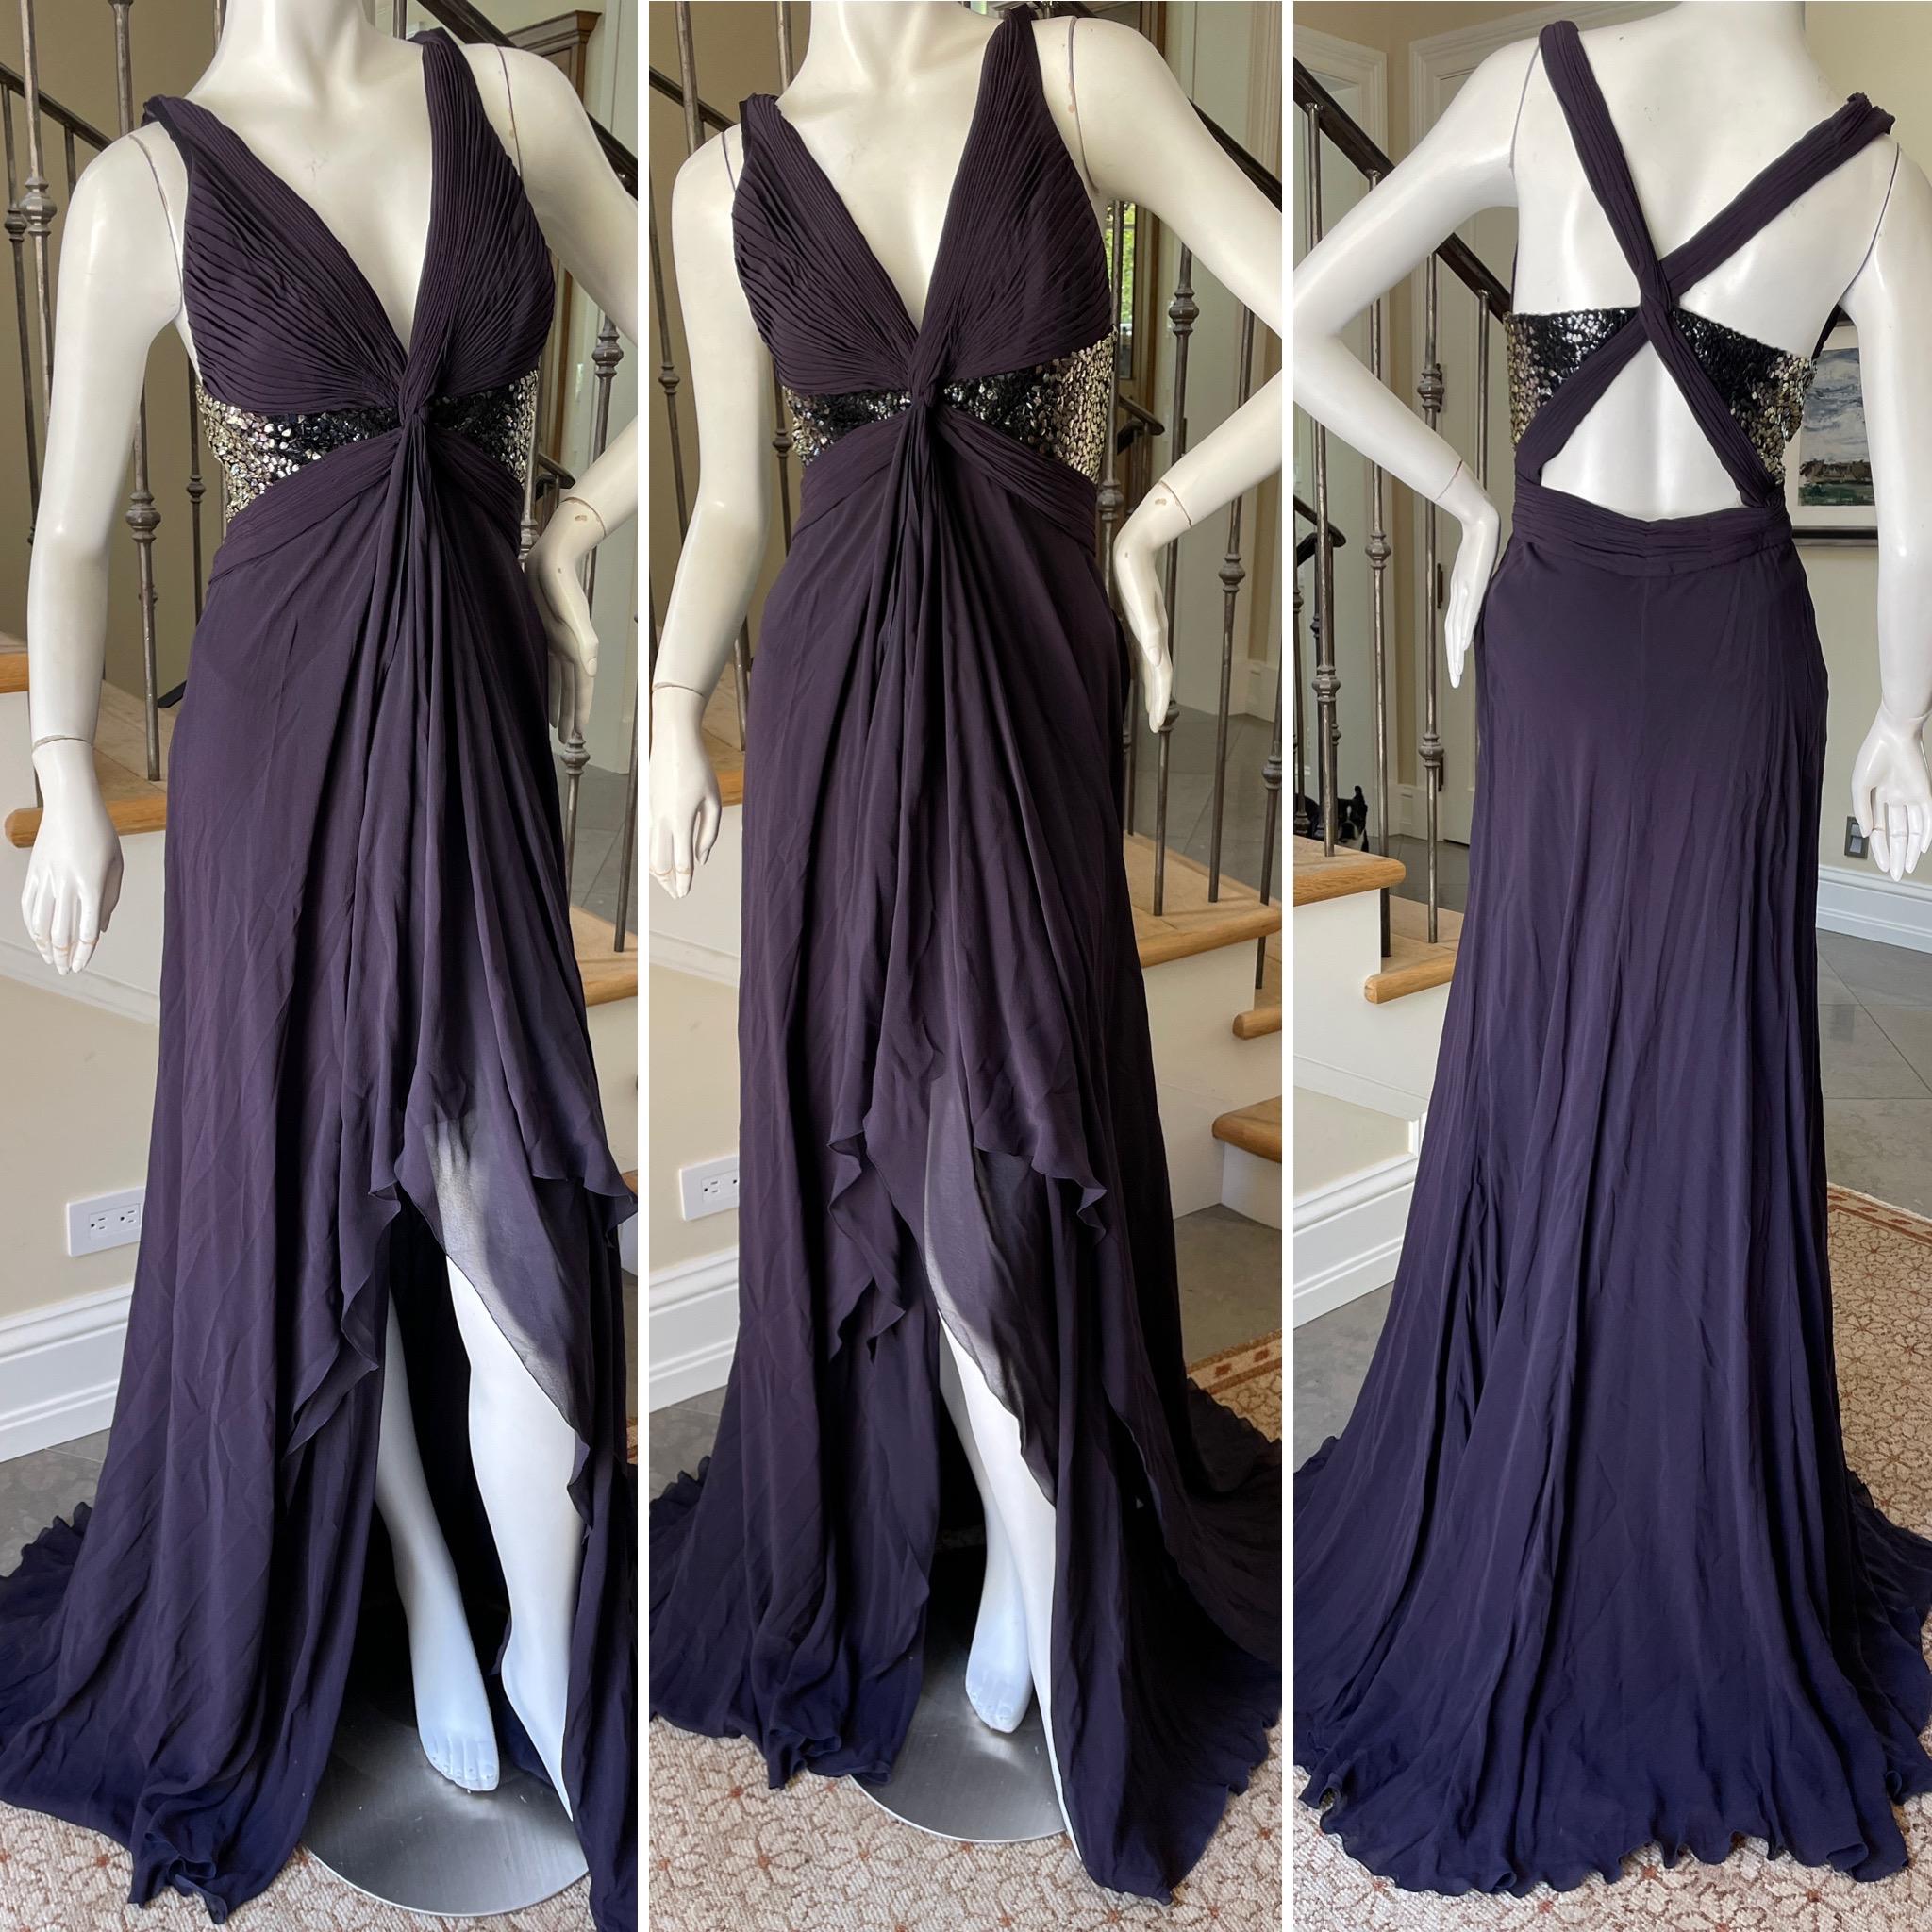 Roberto Cavalli Purple Silk Sexy Back Vintage Evening Dress with Ombre Sequins.
So pretty. Size 40
With an inner body suit
 Bust 34